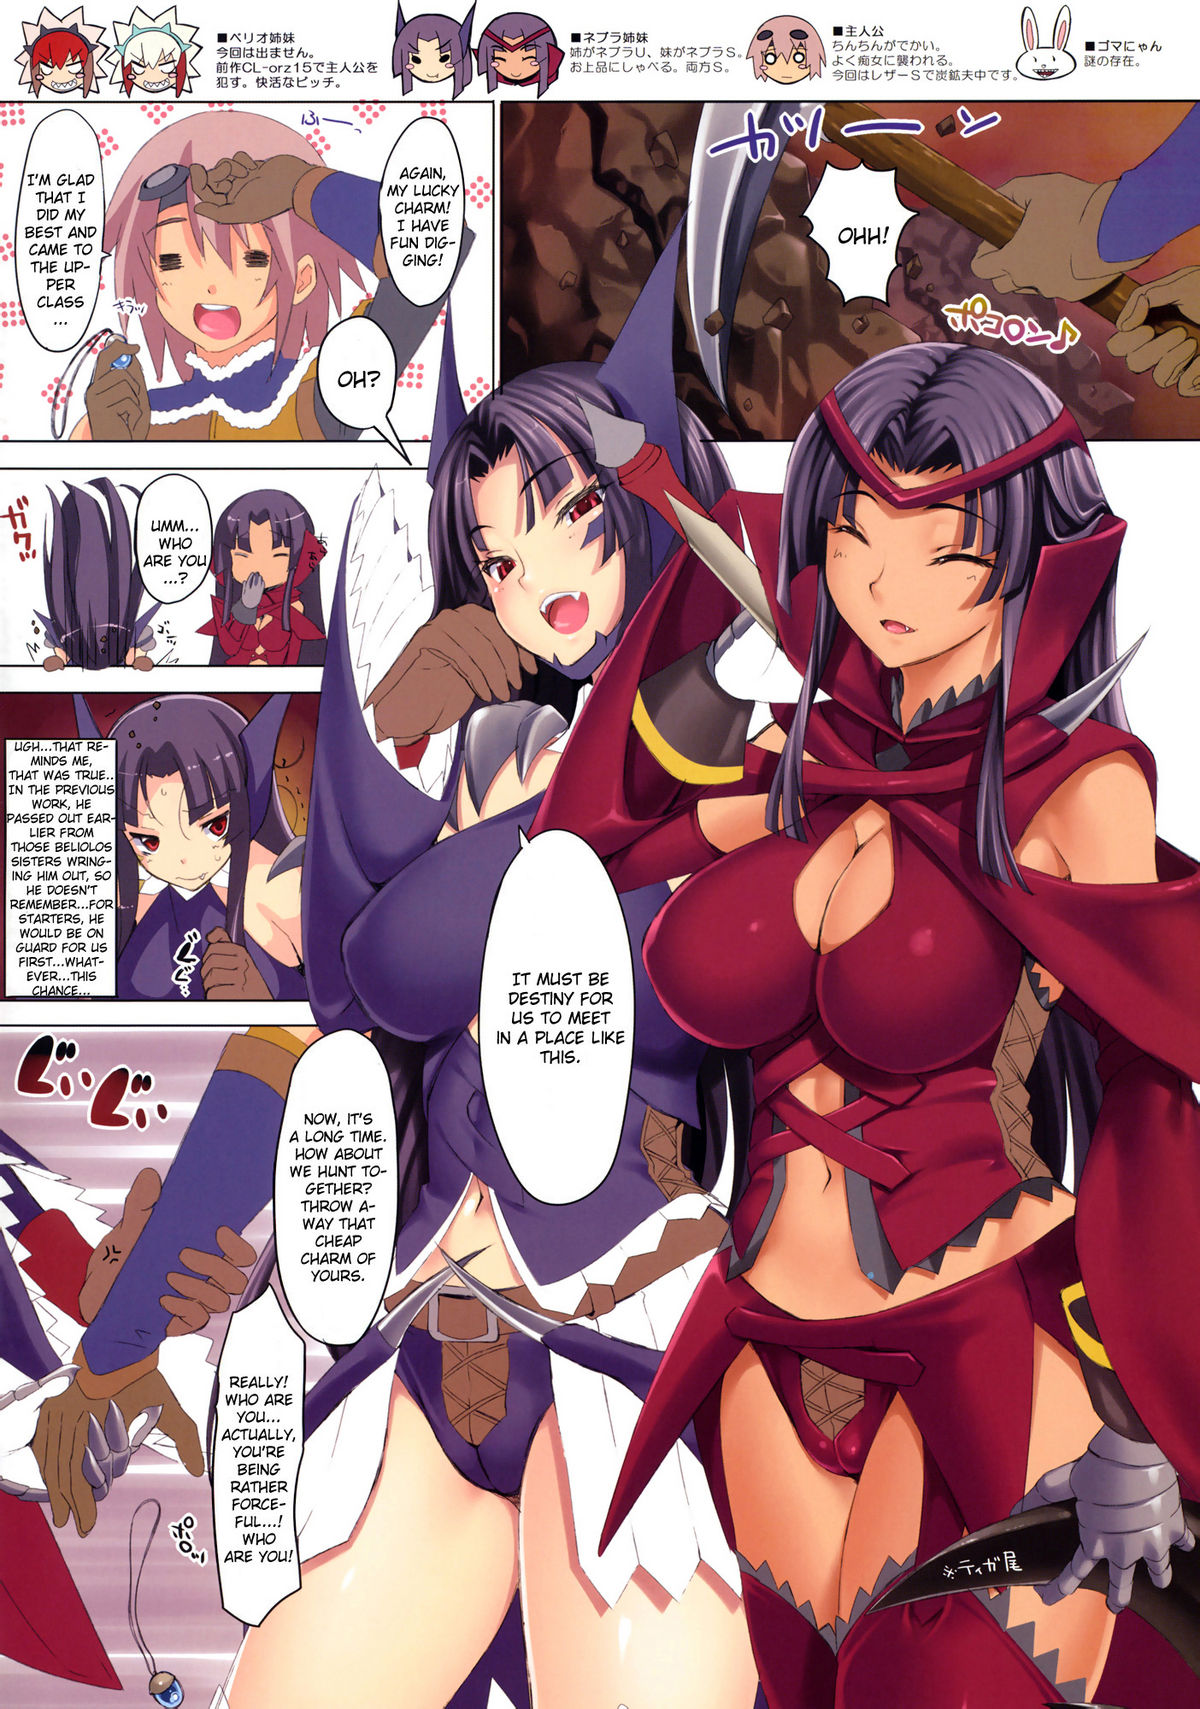 (C80) [Clesta (Cle Masahiro)] CL-orz 17 (Monster Hunter) [English] [CGrascal] [Decensored] page 2 full